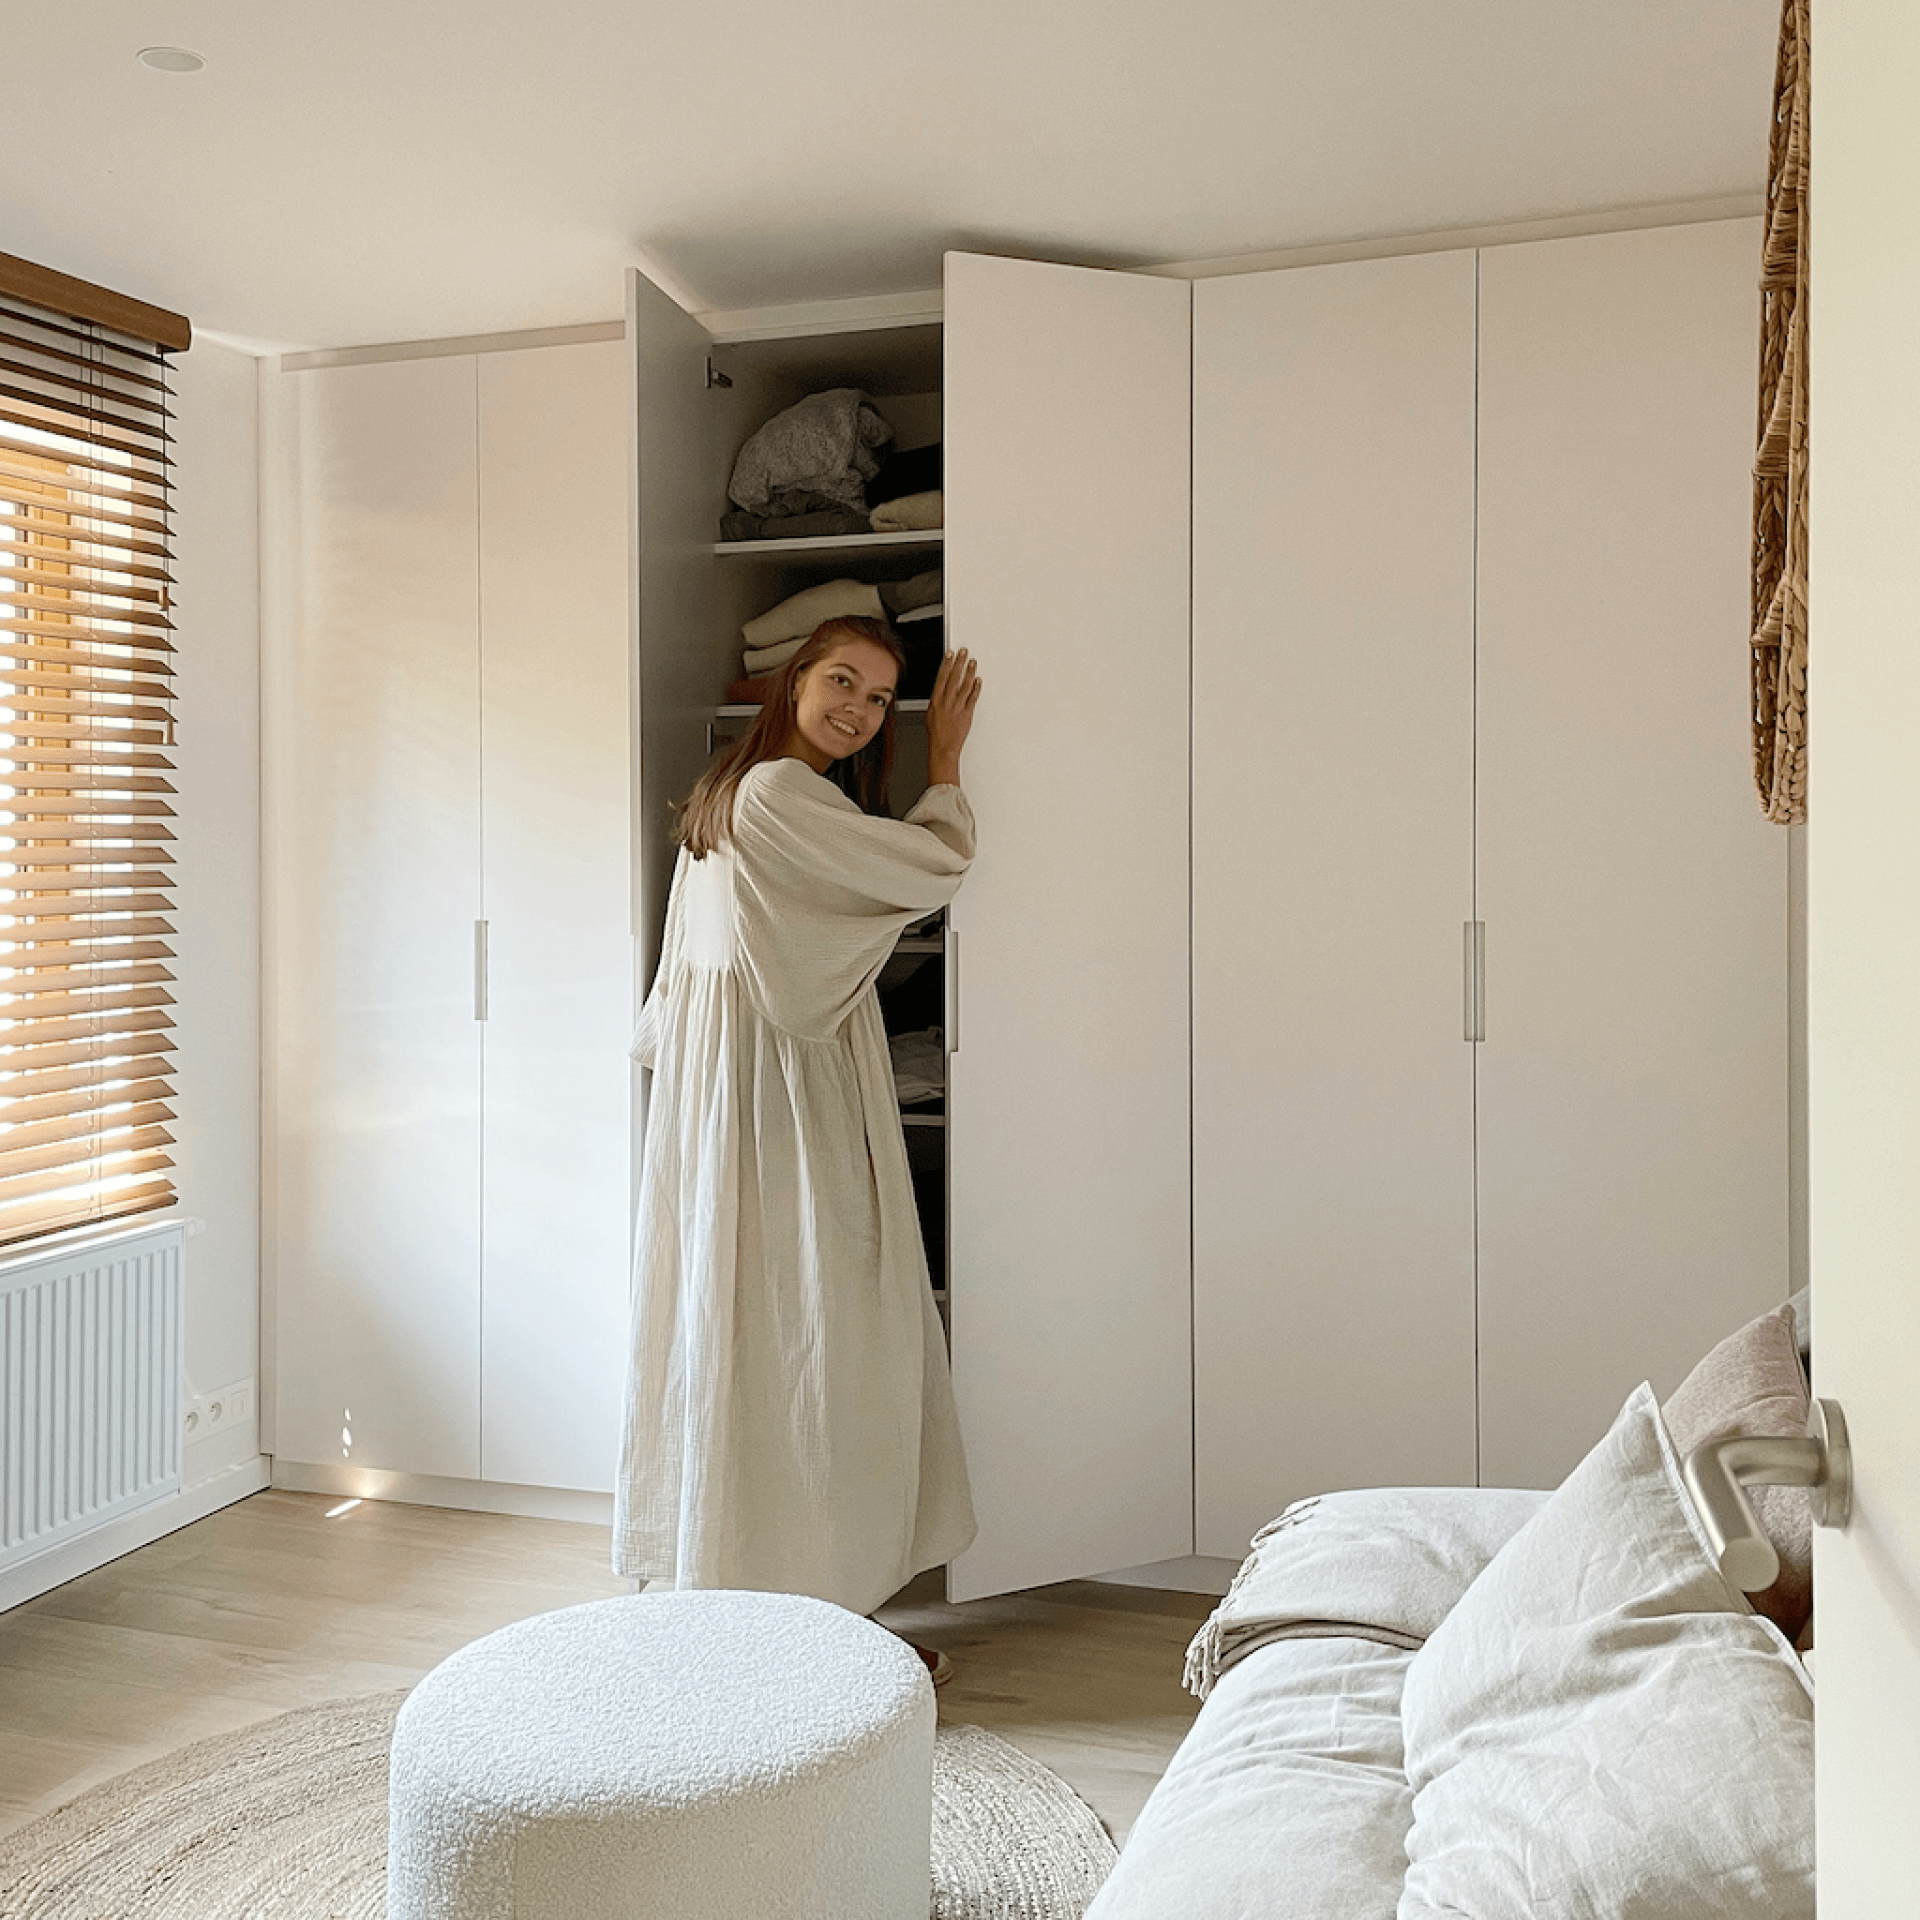 Influencer Romy Vanhaecke in her dressing room with her bespoke mdf wardrobe with short recessed handles